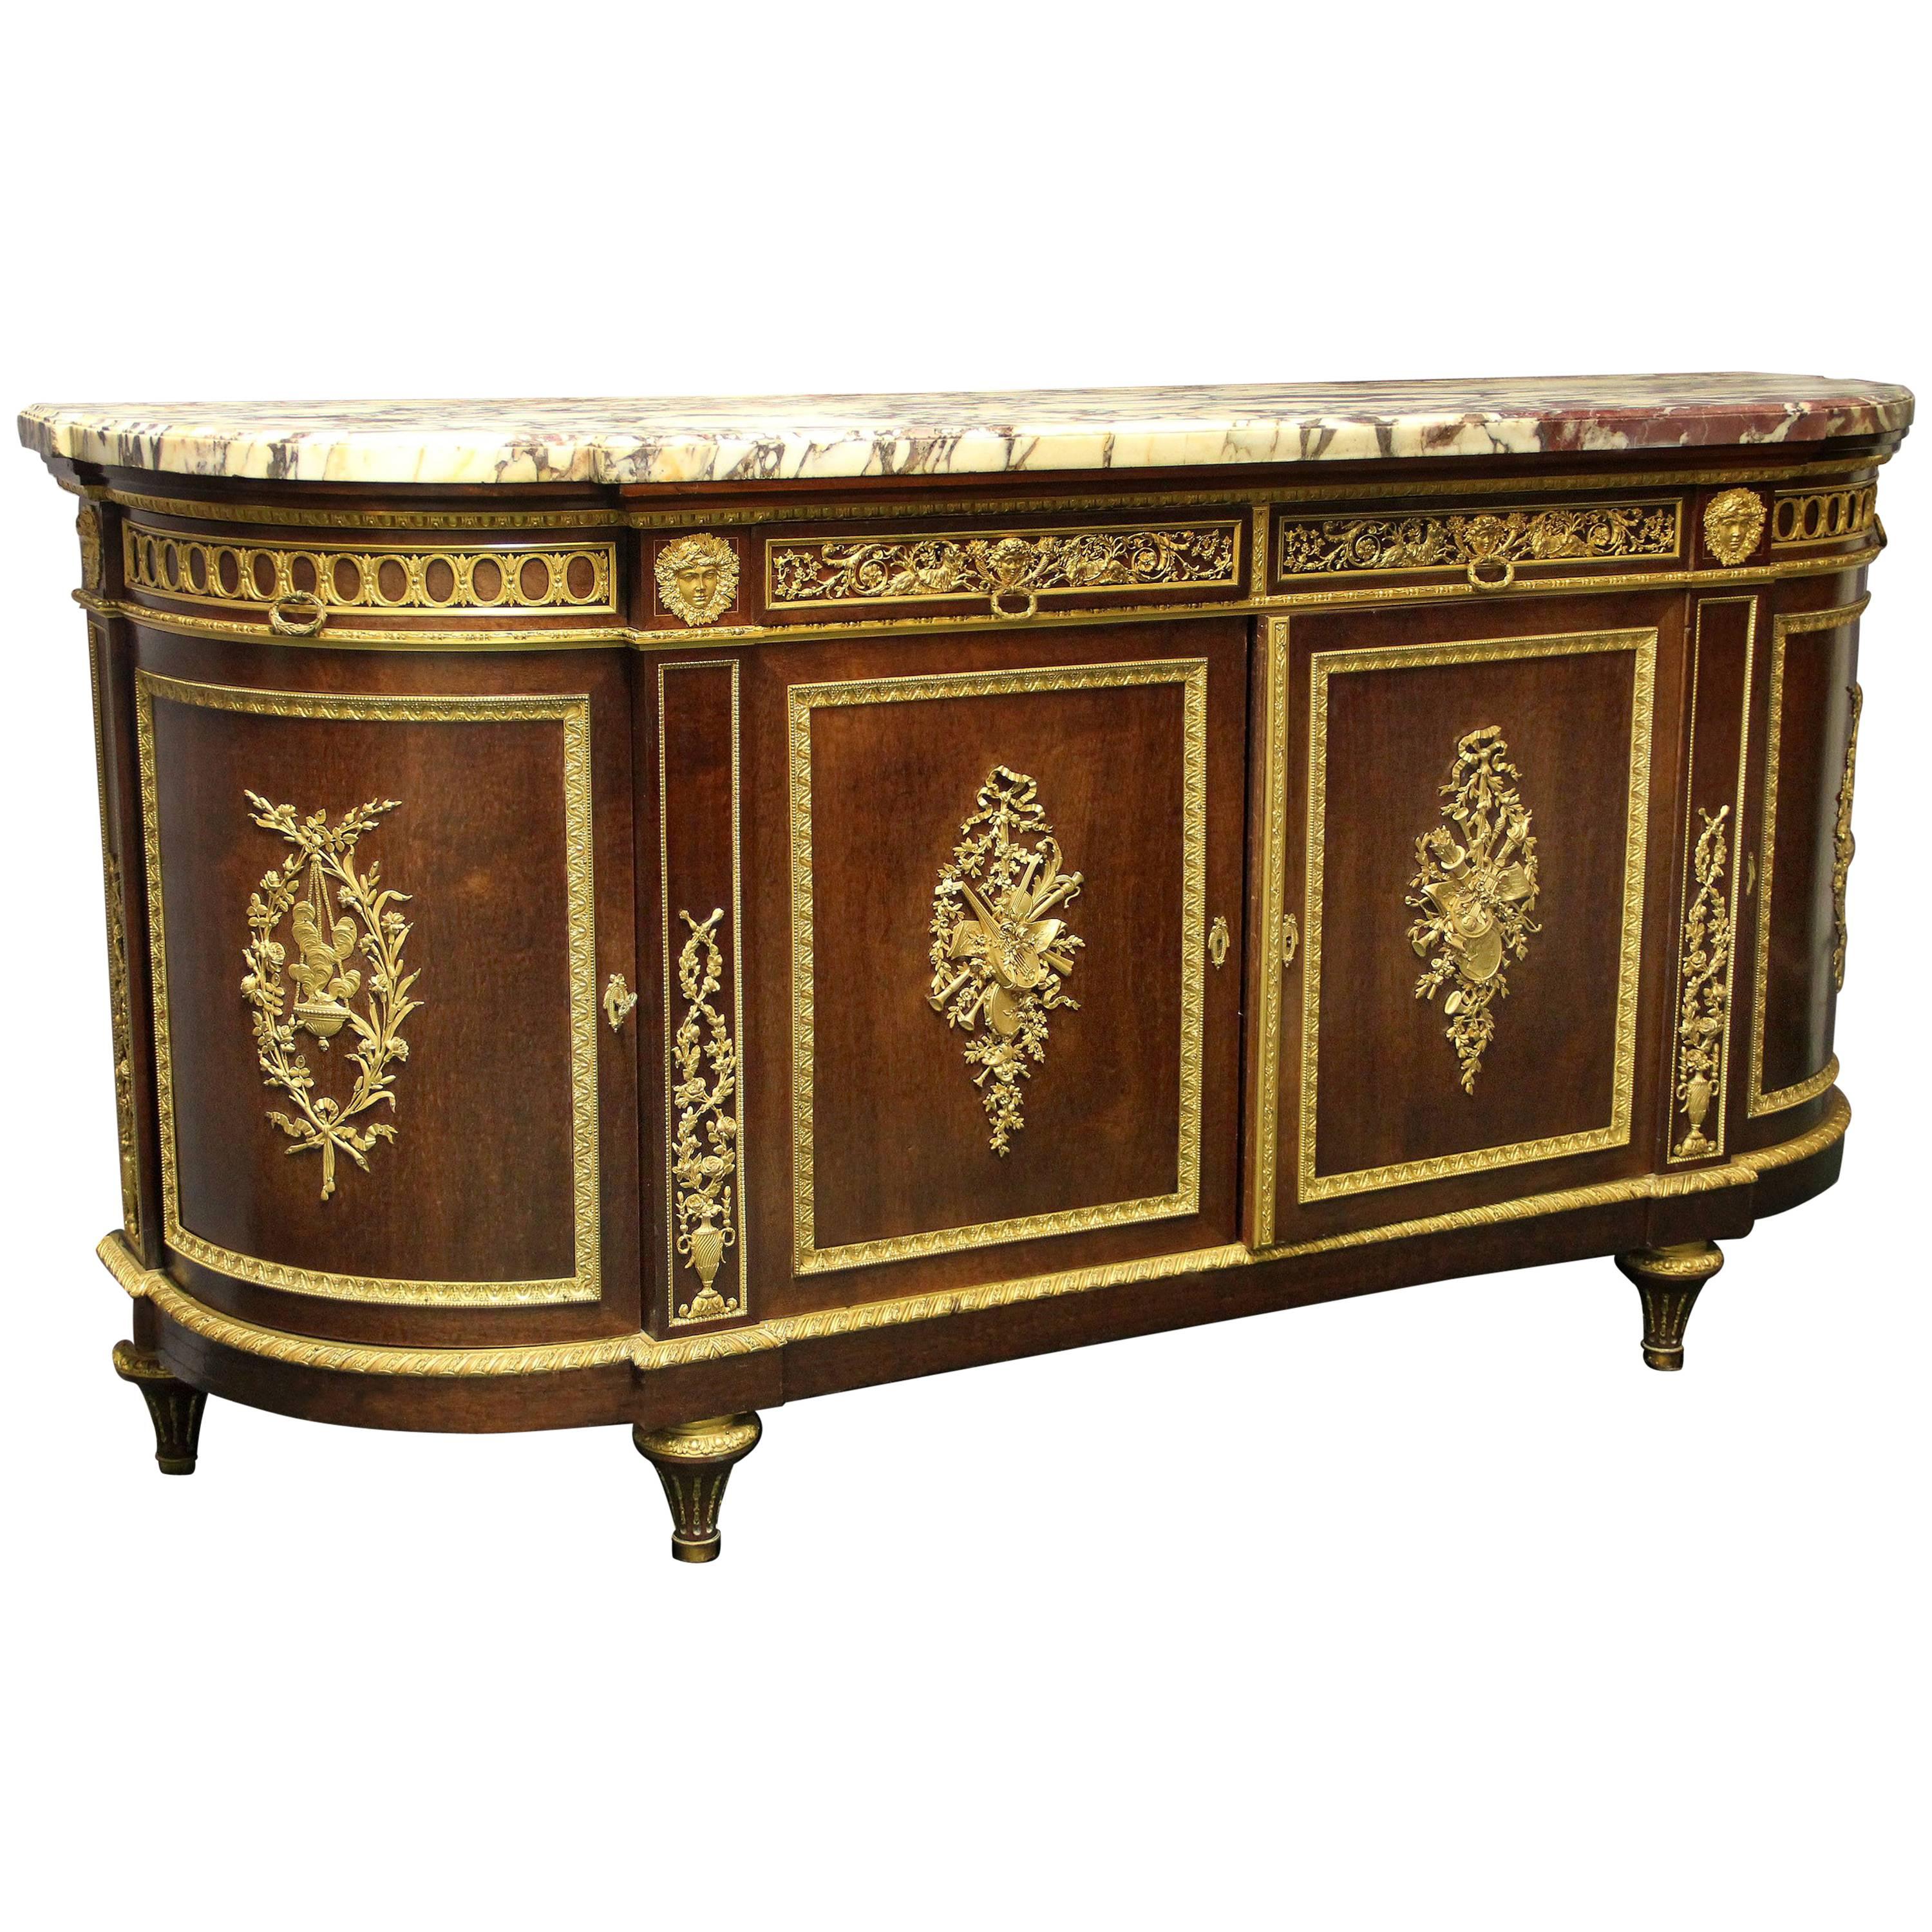 Important Late 19th Century Bronze-Mounted Commode / Server by Maison Grimard